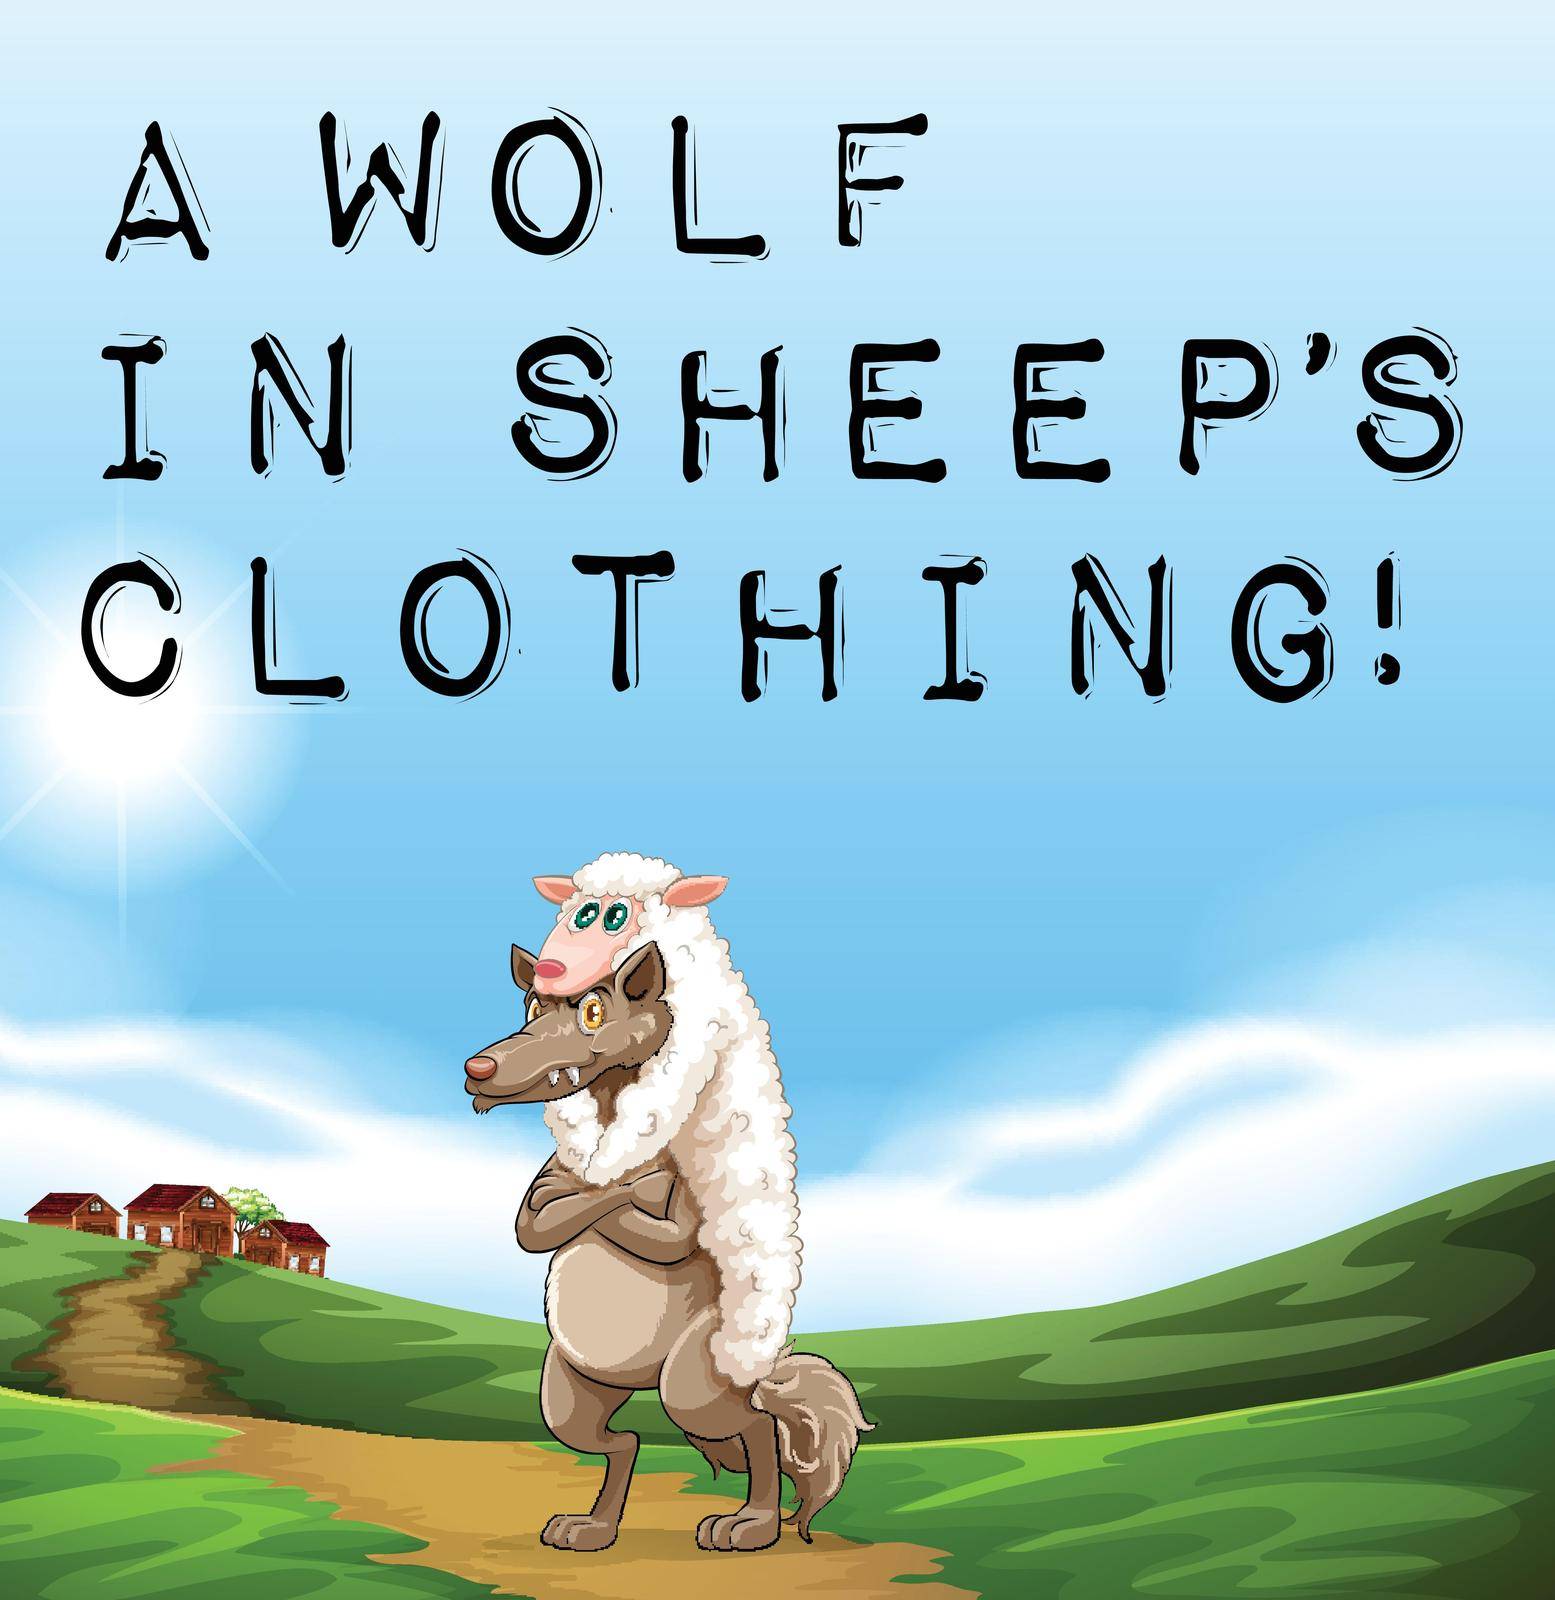 A wolf in sheep's clothing by iimages